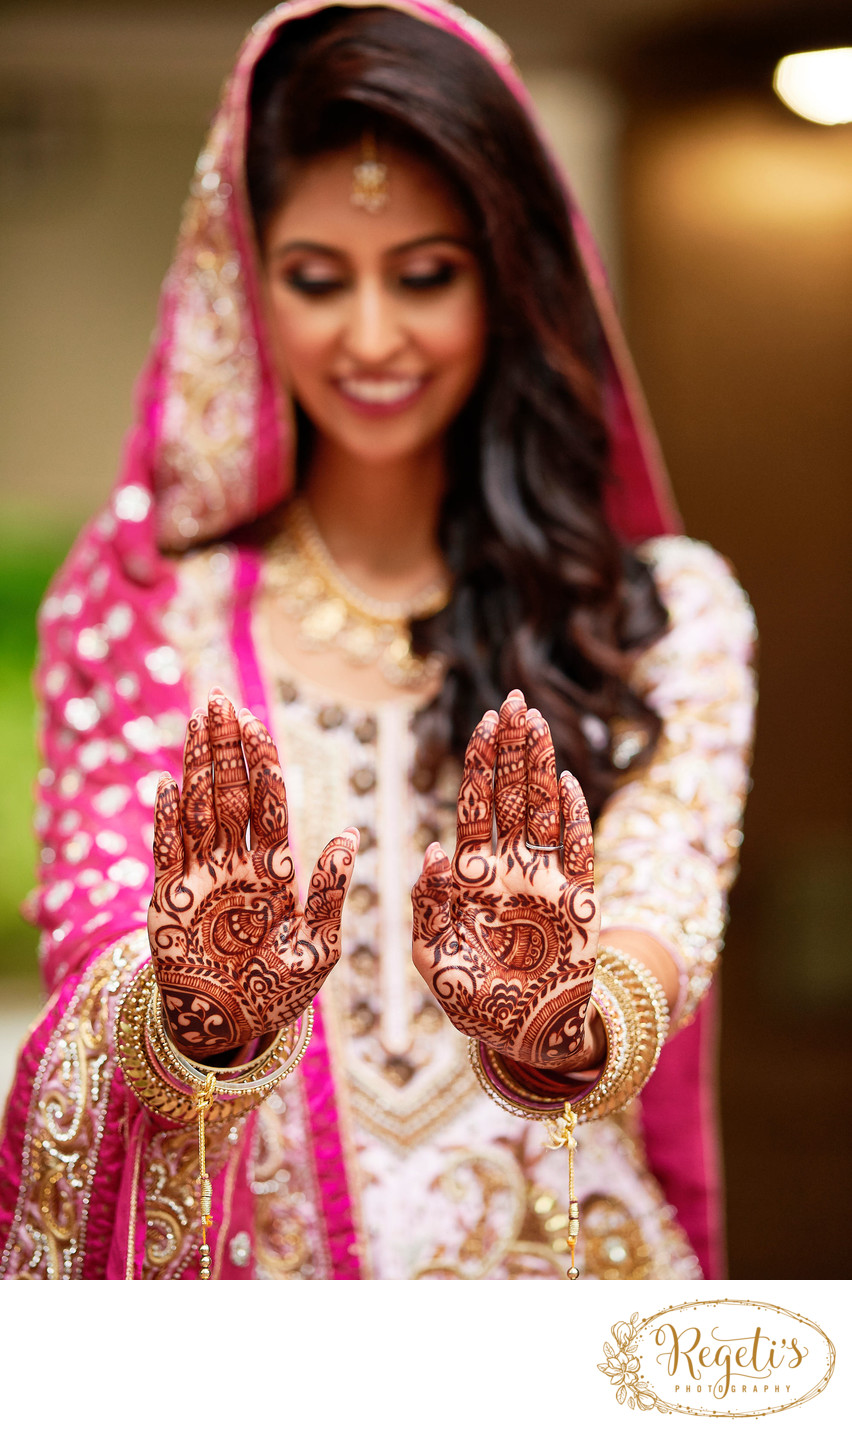 Indian And South Asian Indian Destination Wedding Photographers Dc Regeti S